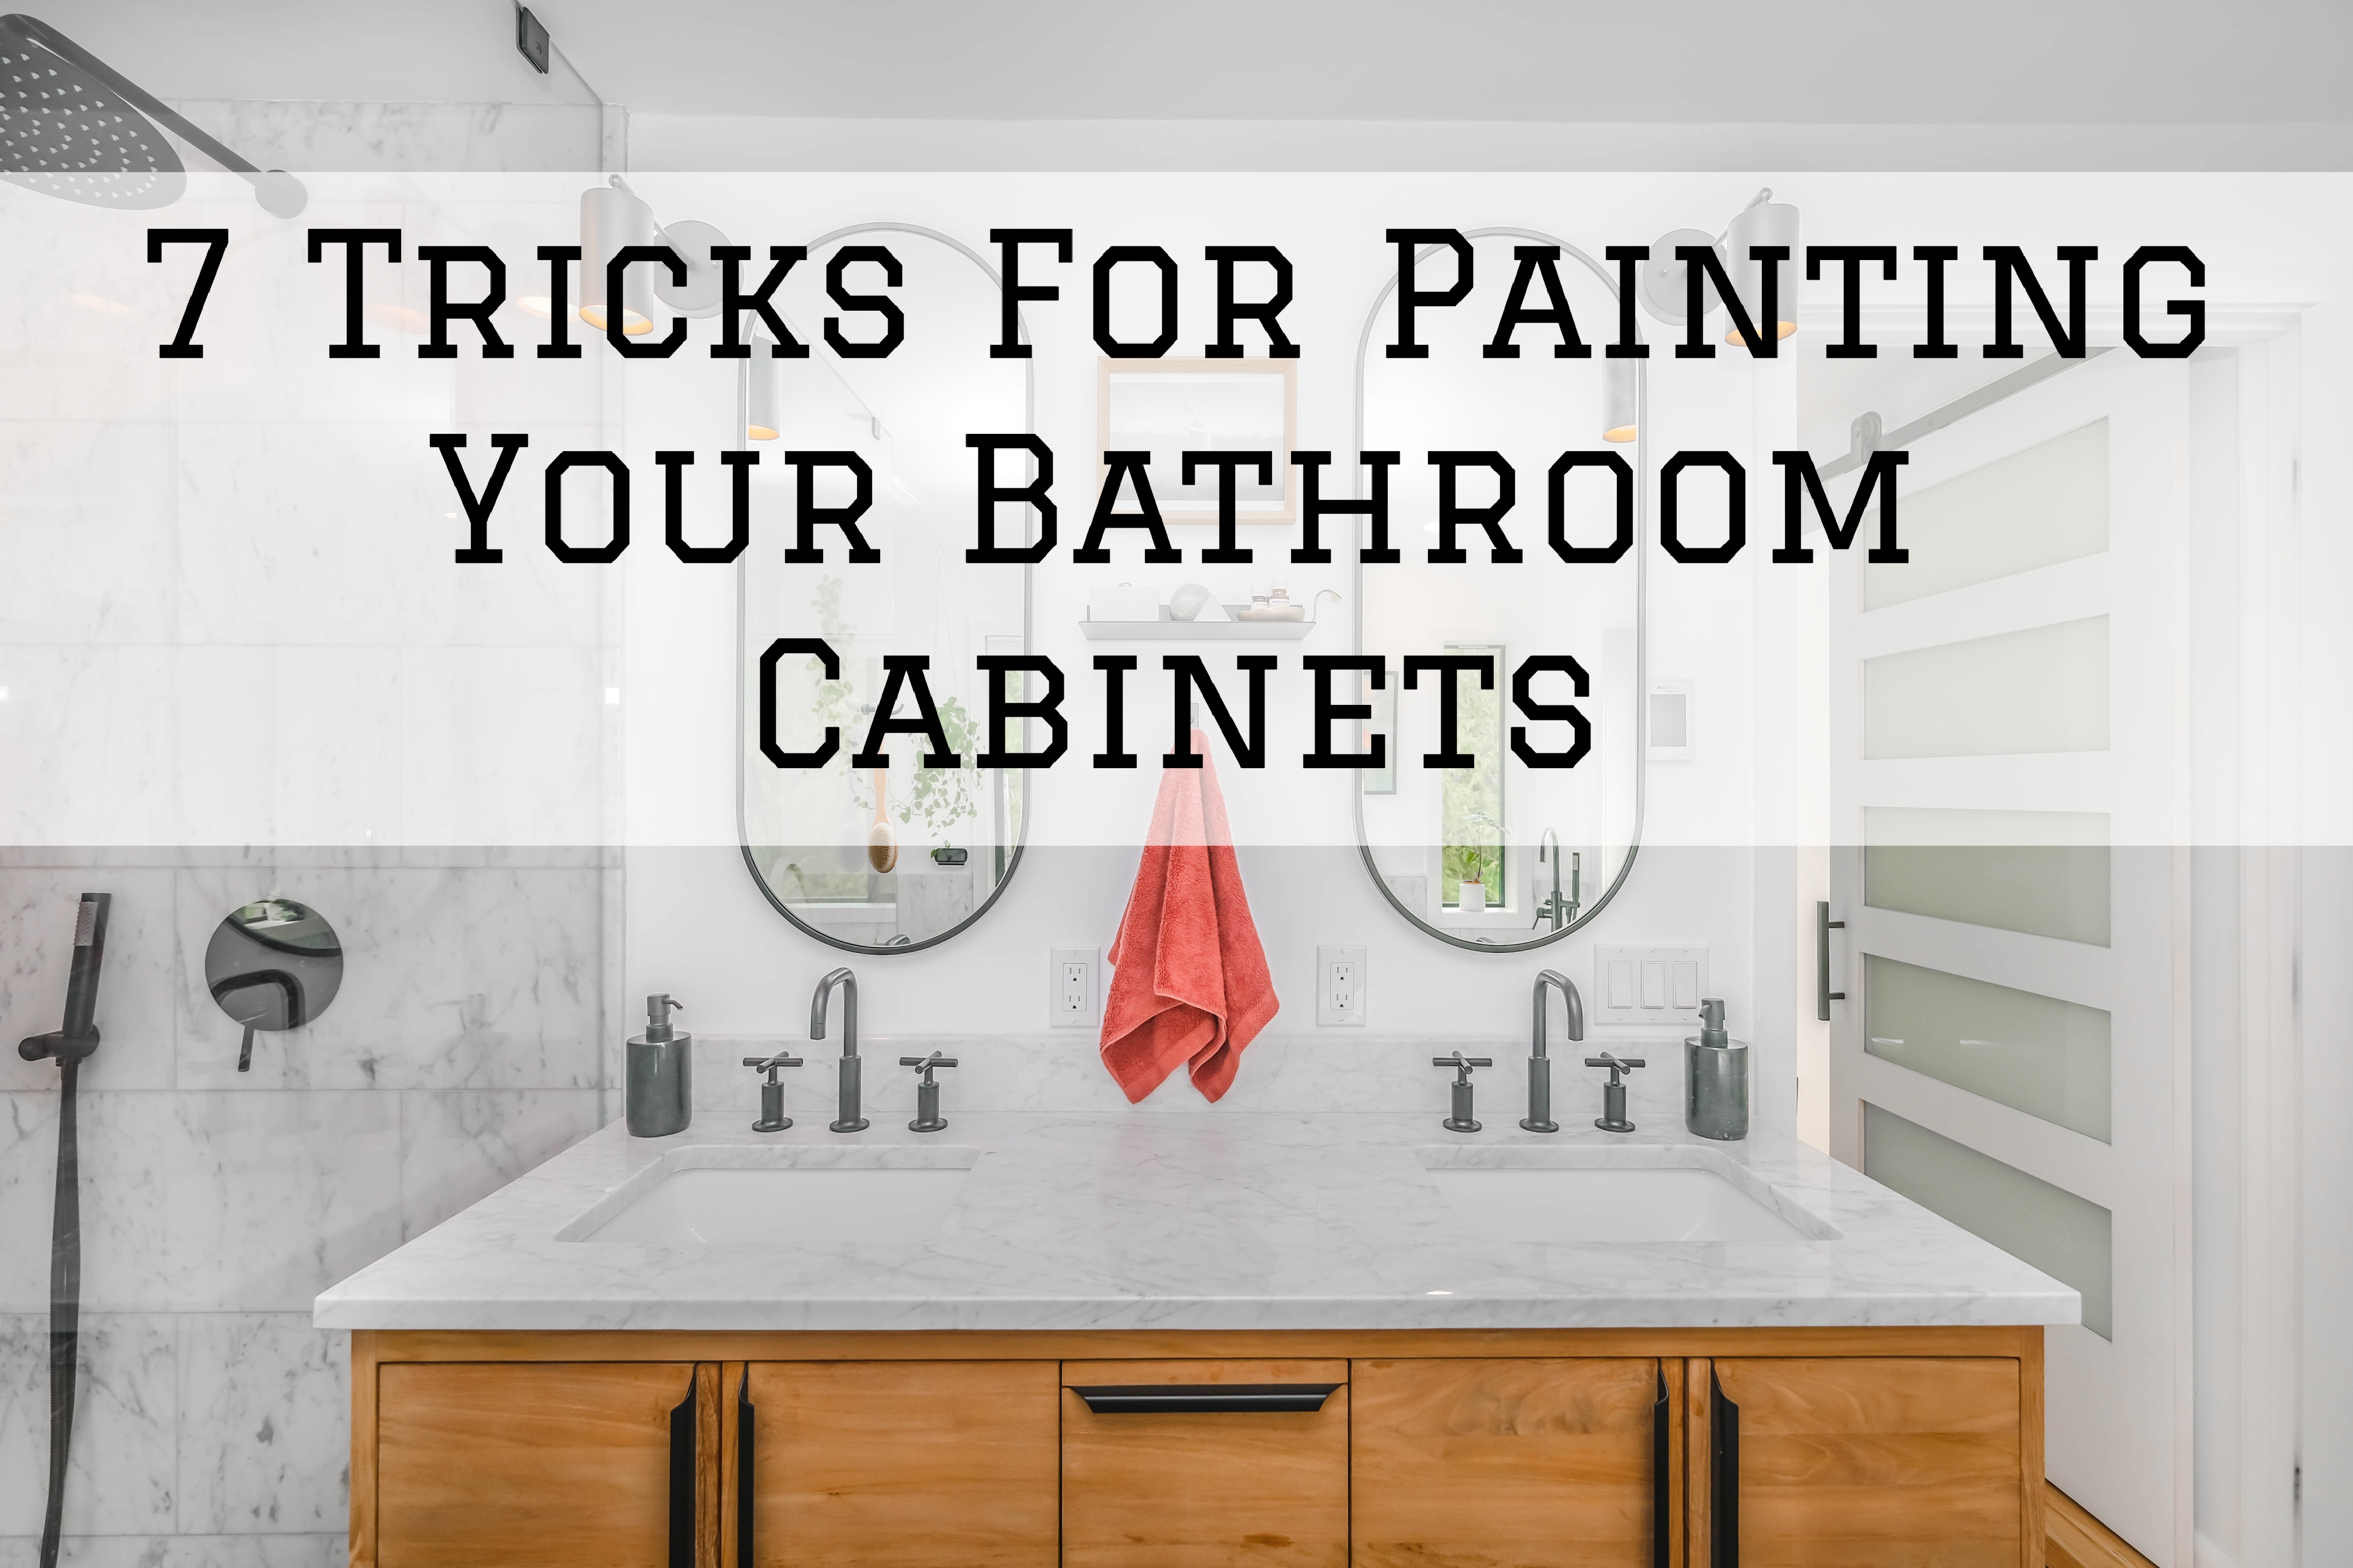 18 Tricks For Painting Your Bathroom Cabinets in Ottawa, Ontario ...